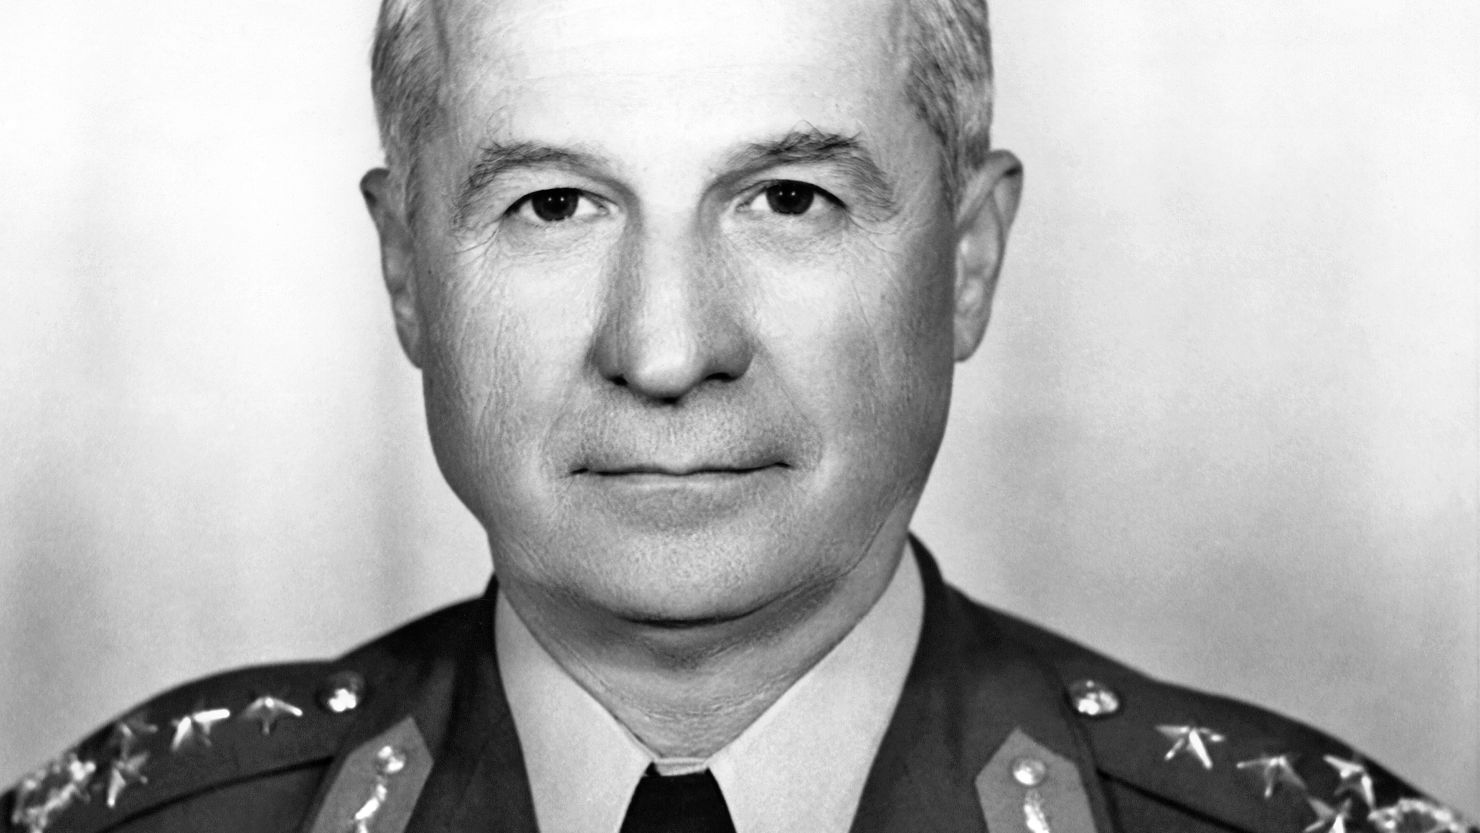 A photo taken in 1977 shows Turkey's now retired army general and former president Kenan Evren.